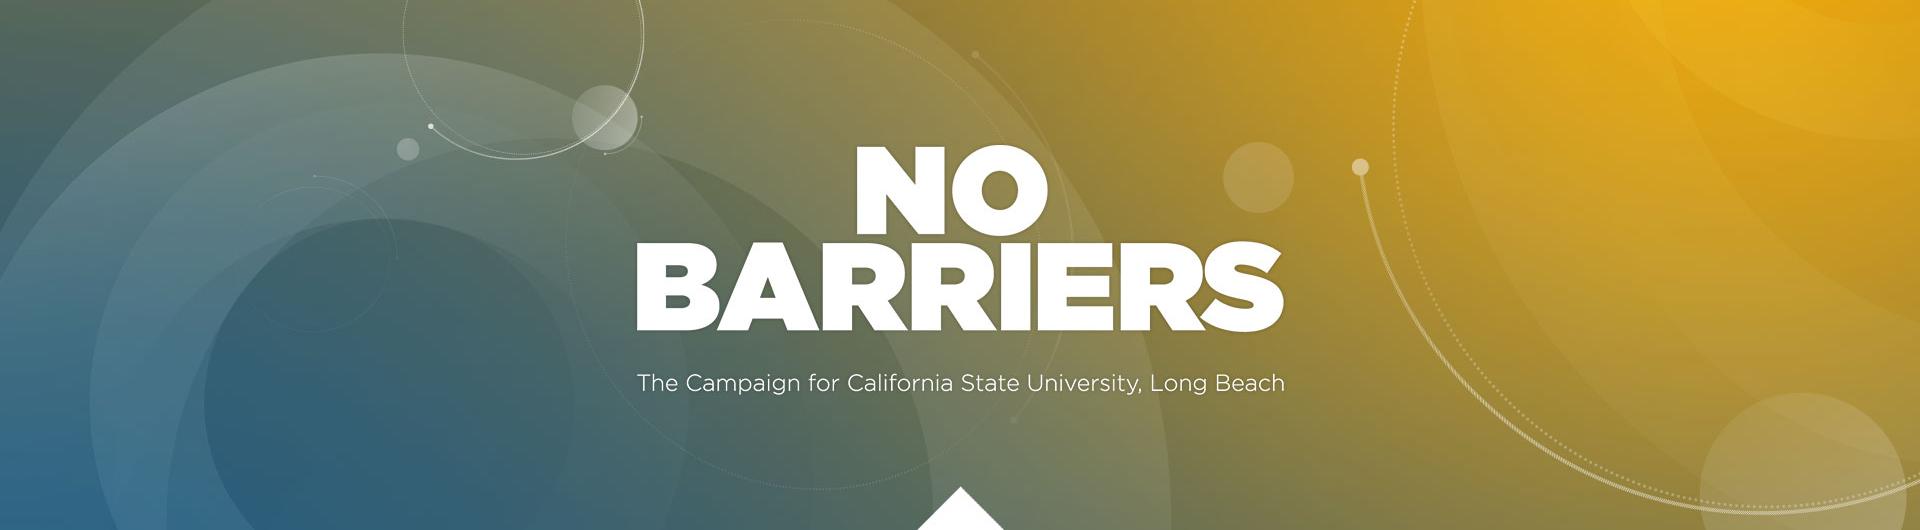 No Barriers Campaign